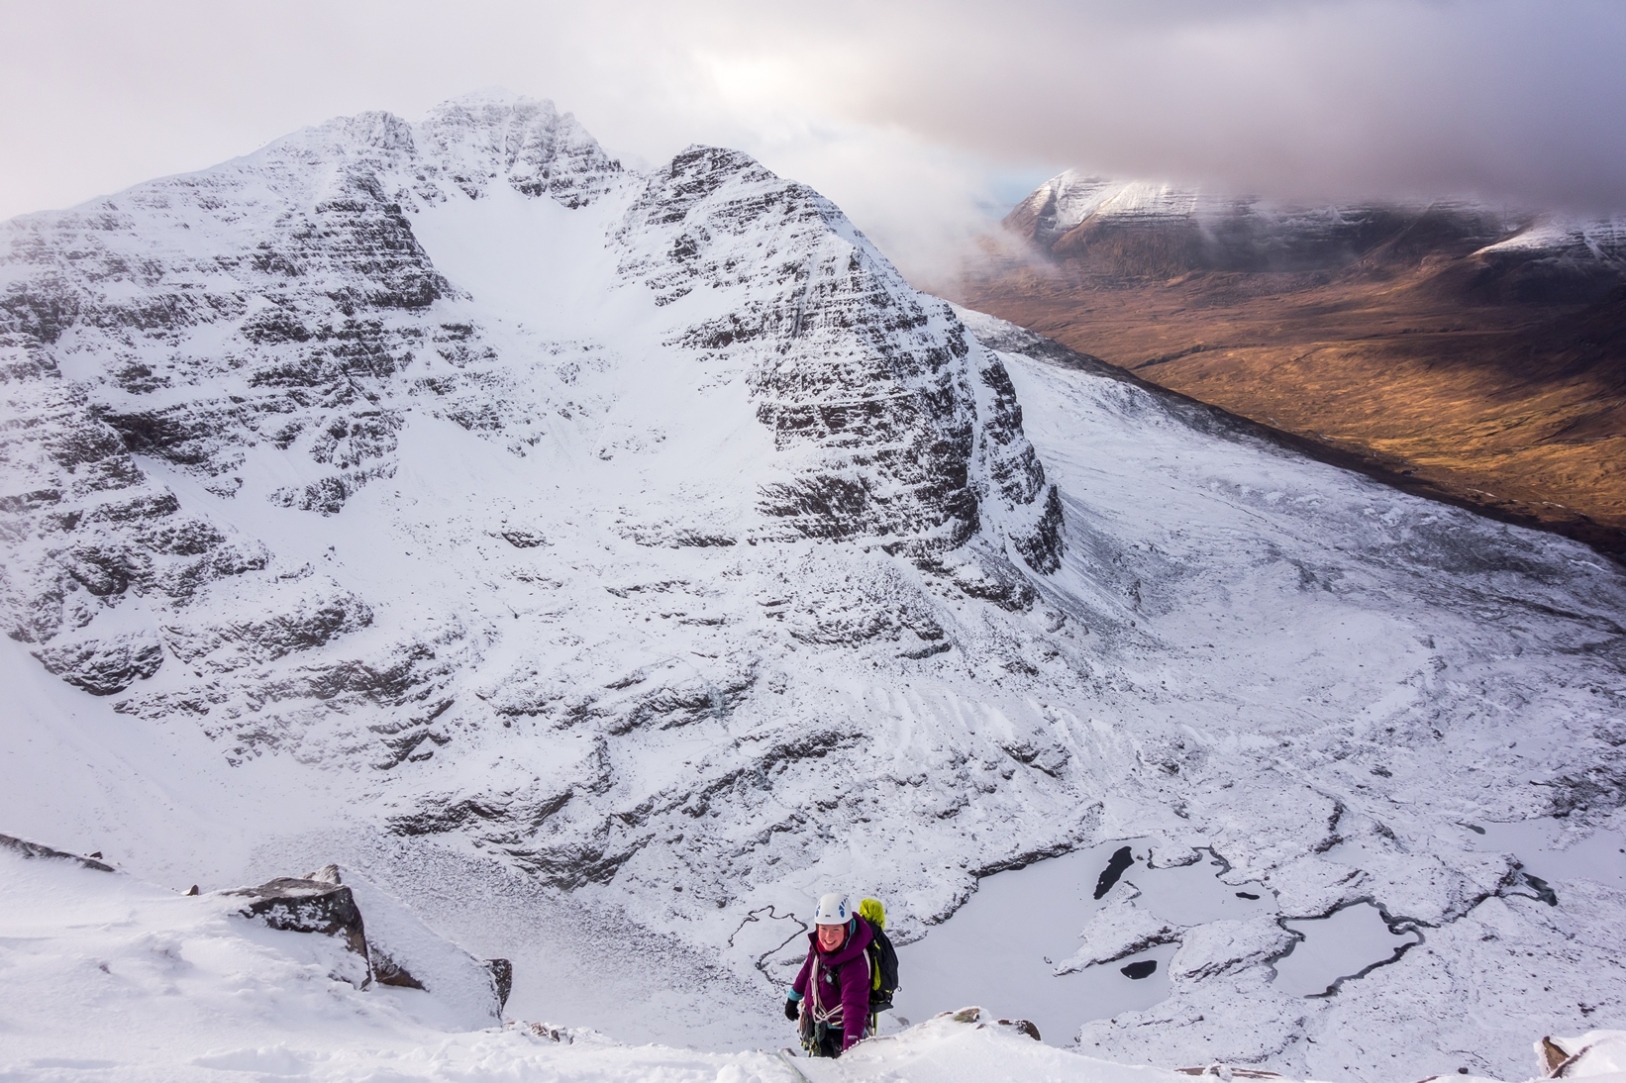 Mrs Riley in her element - beautiful views into Coire na Caime and on to Beinn Alligin